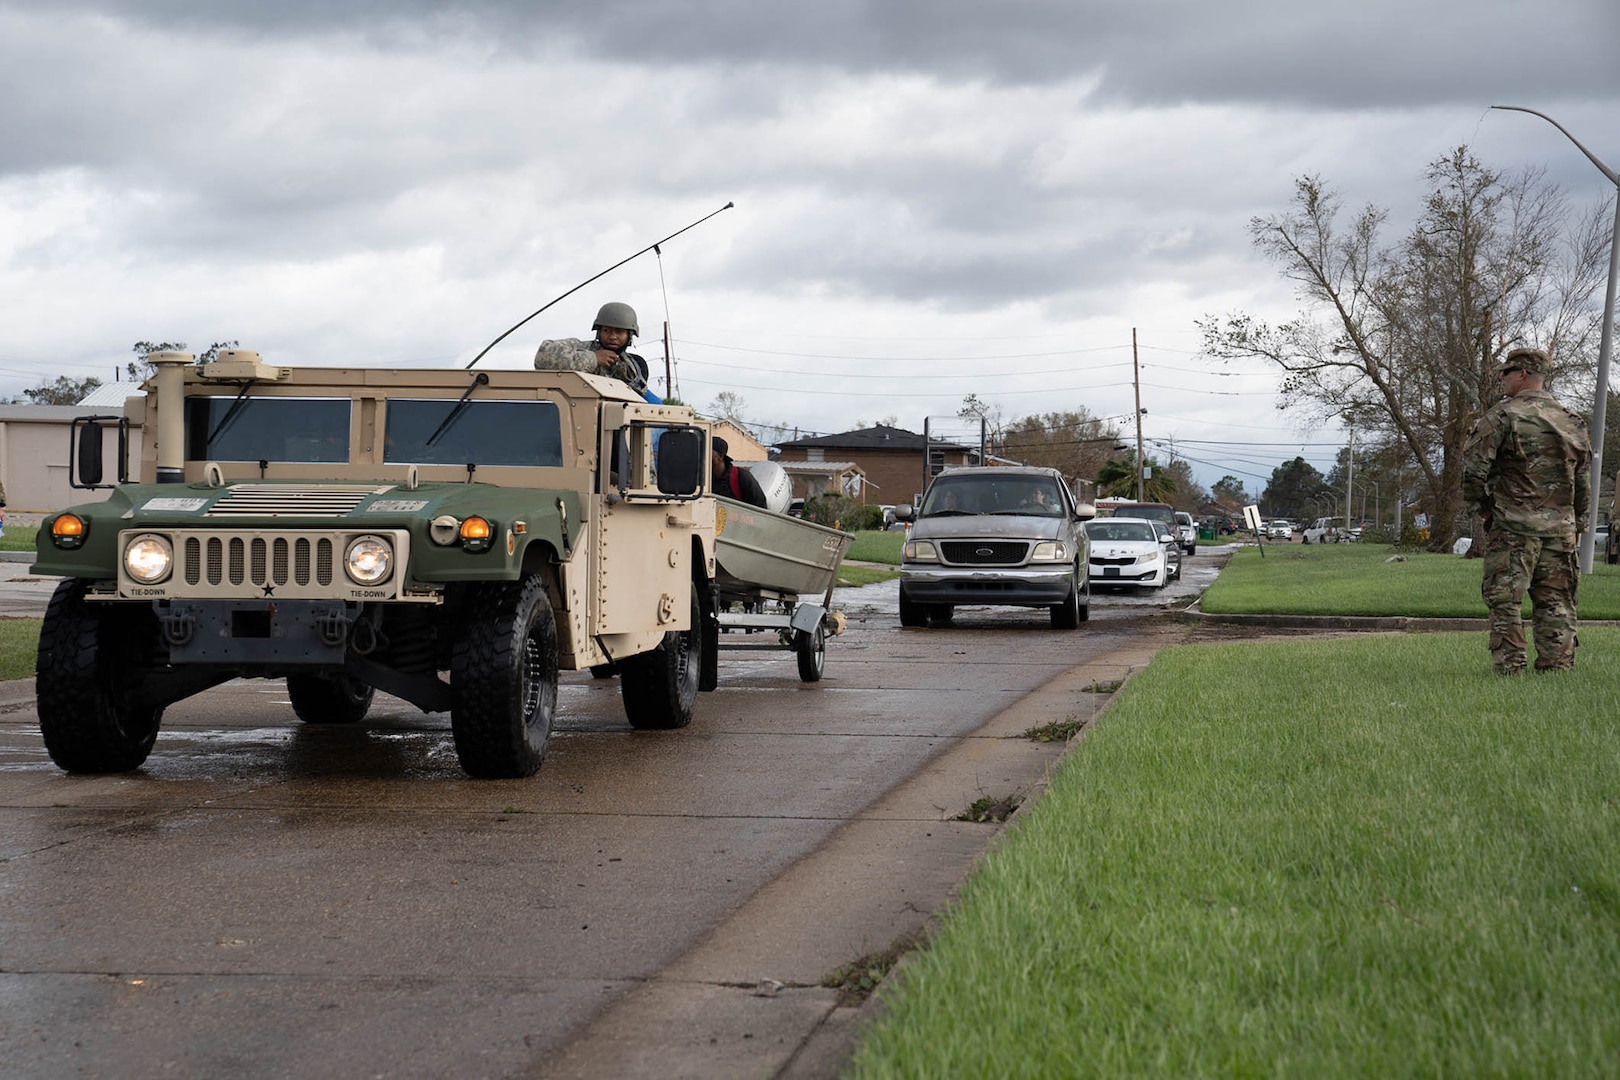 Louisiana National Guard members in high-water vehicles and boats work with St. John the Baptist Parish officials to rescue people stranded in their homes in the wake of Hurricane Ida.